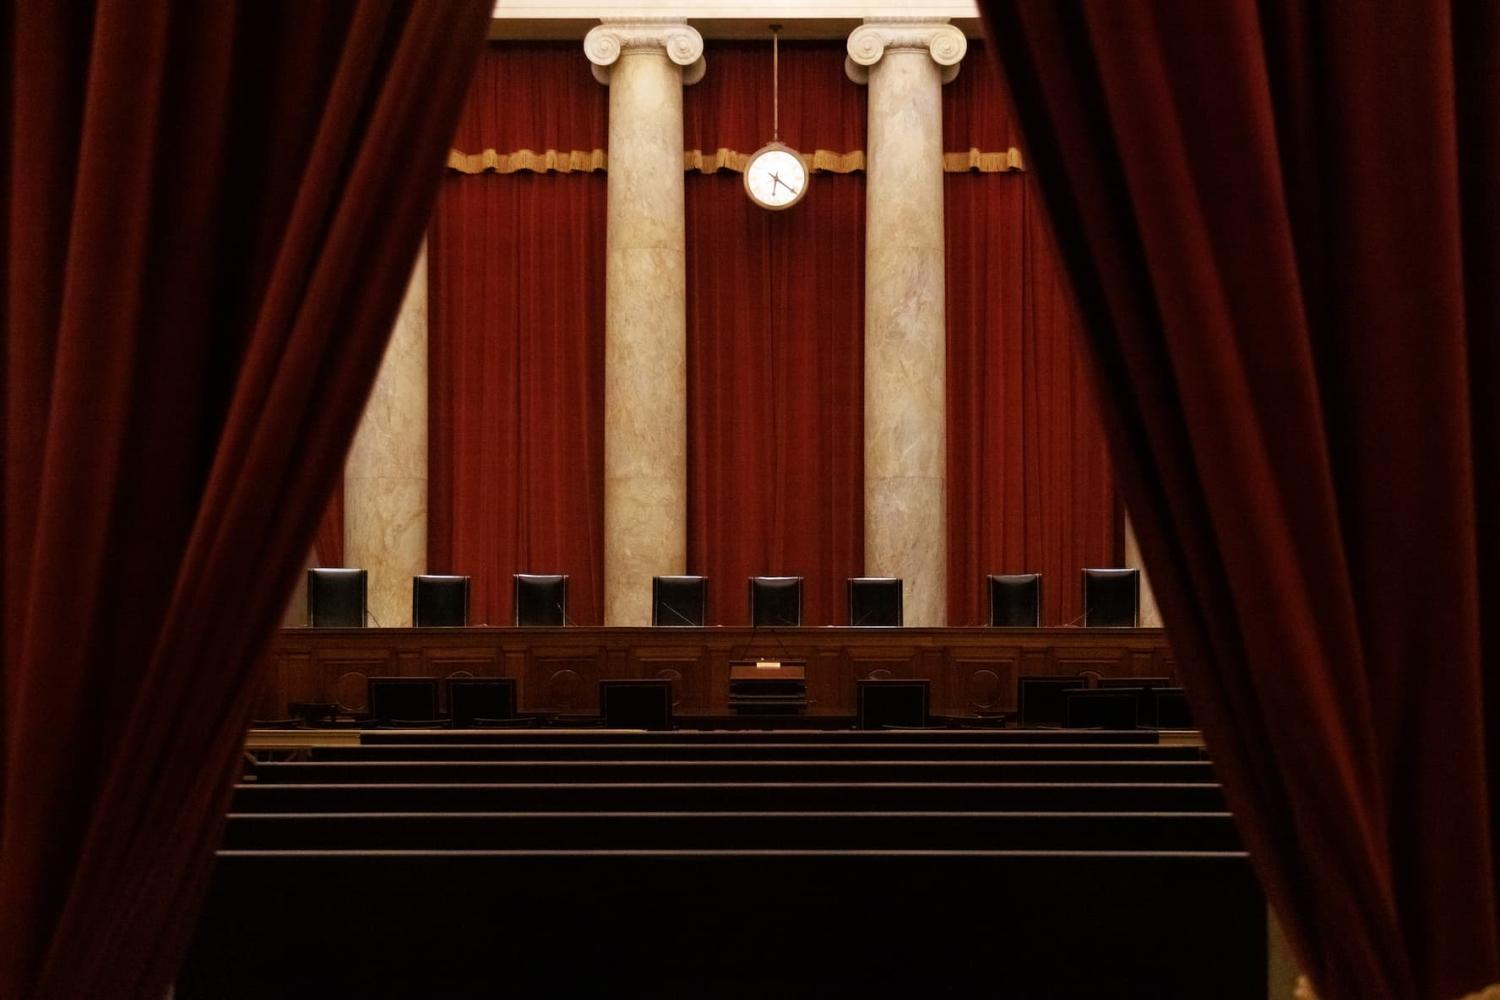 The Court Chamber inside of the Supreme Court building in Washington, D.C. is seen on December 6, 2022.